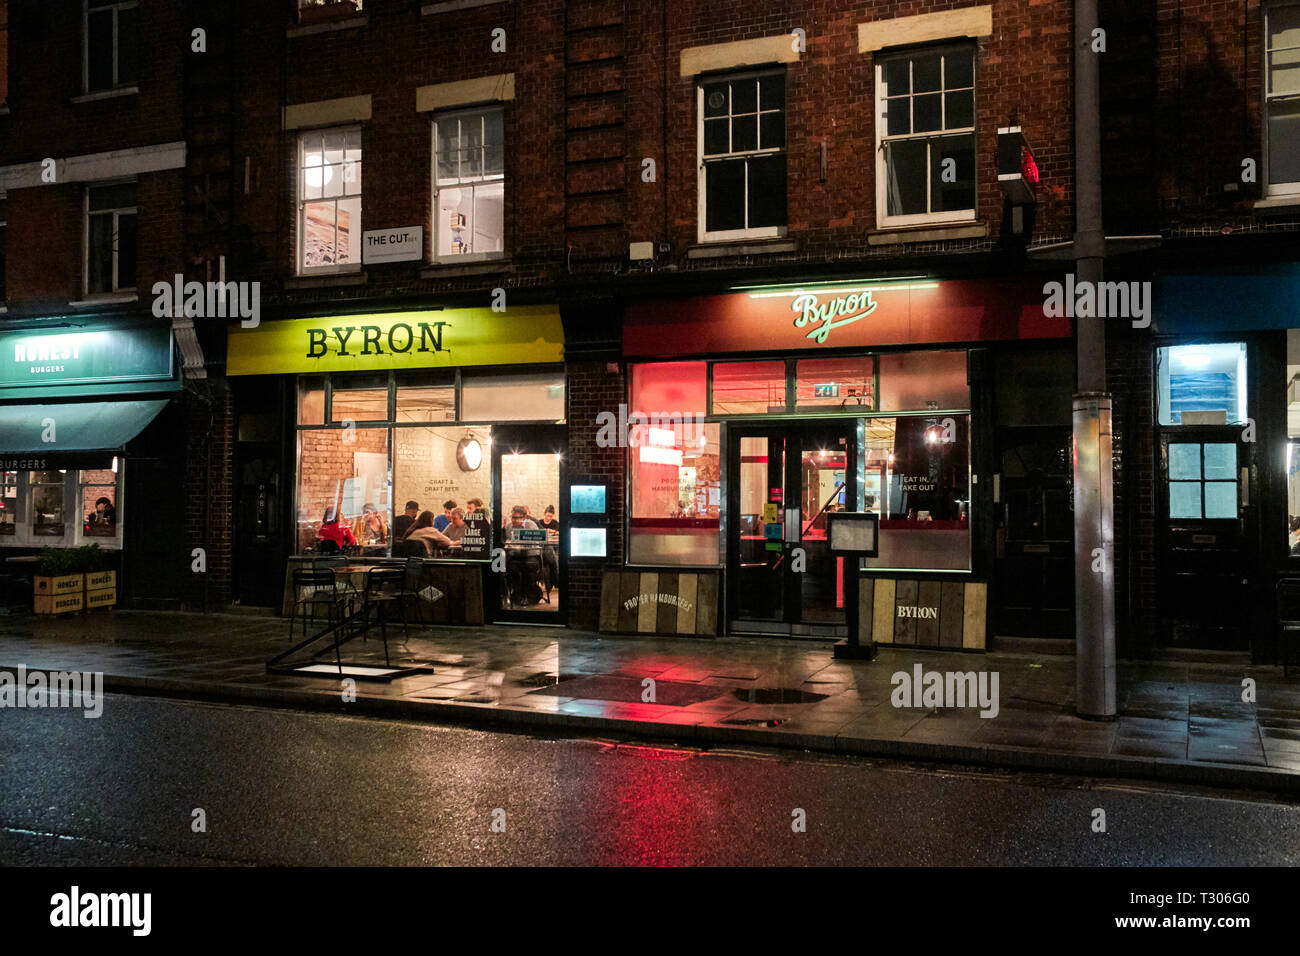 Byron restaurant at night in the Cut near Waterloo station, London Stock Photo